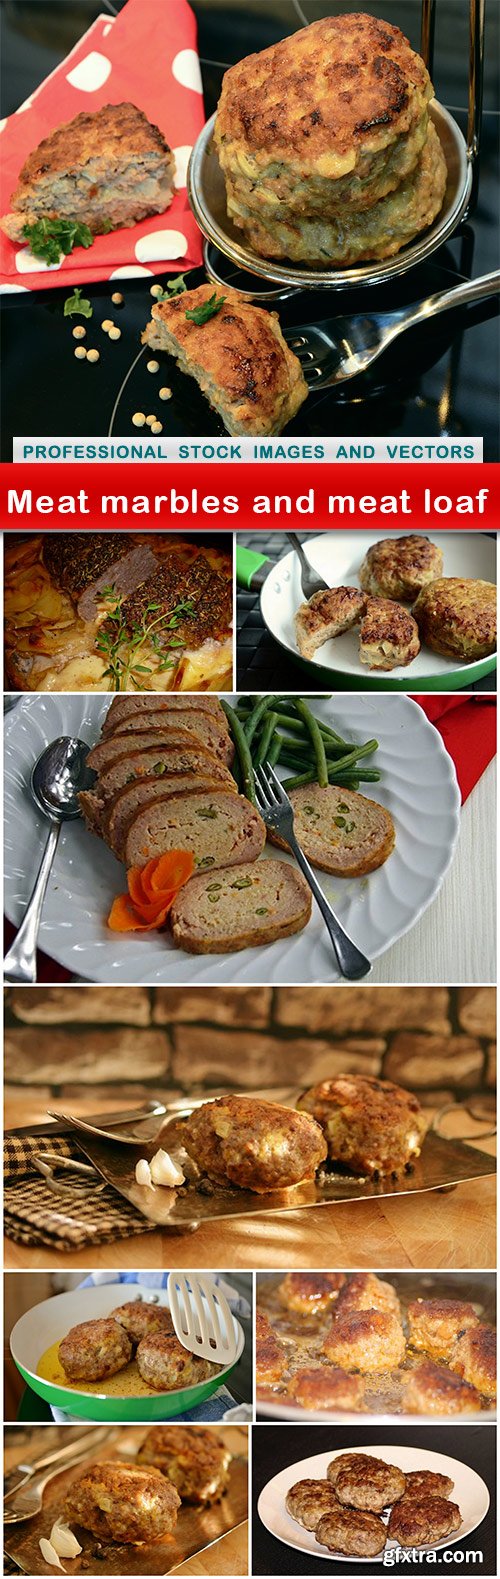 Meat marbles and meat loaf - 9 UHQ JPEG